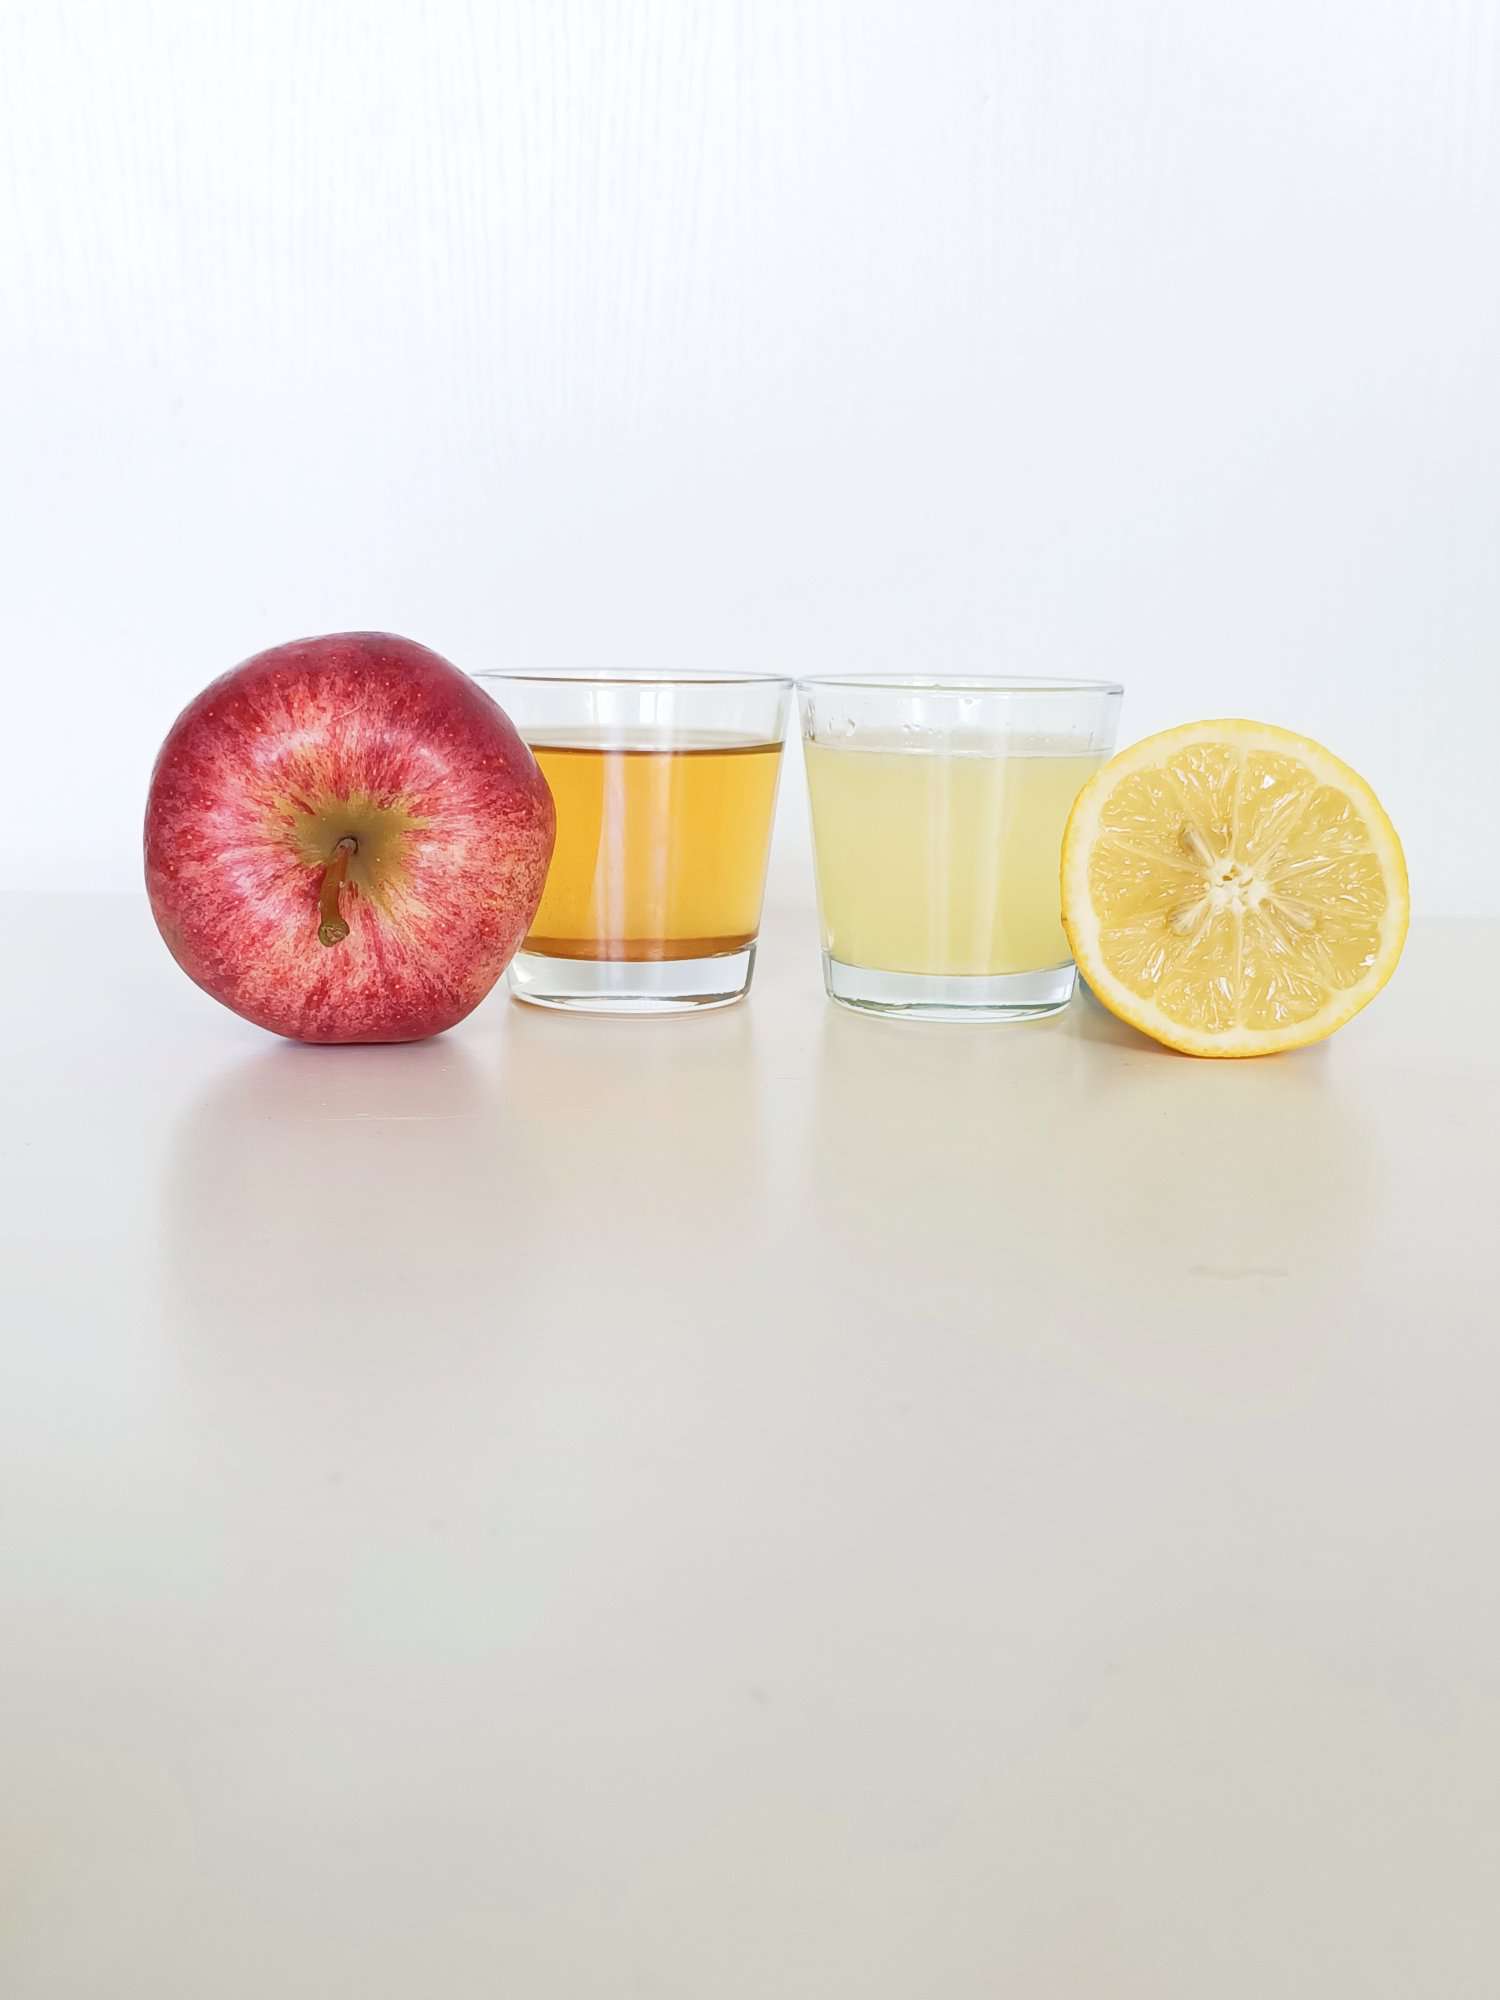 WHAT IS THE BENEFIT OF DRINKING APPLE CIDER VINEGAR AND LEMON JUICE ?